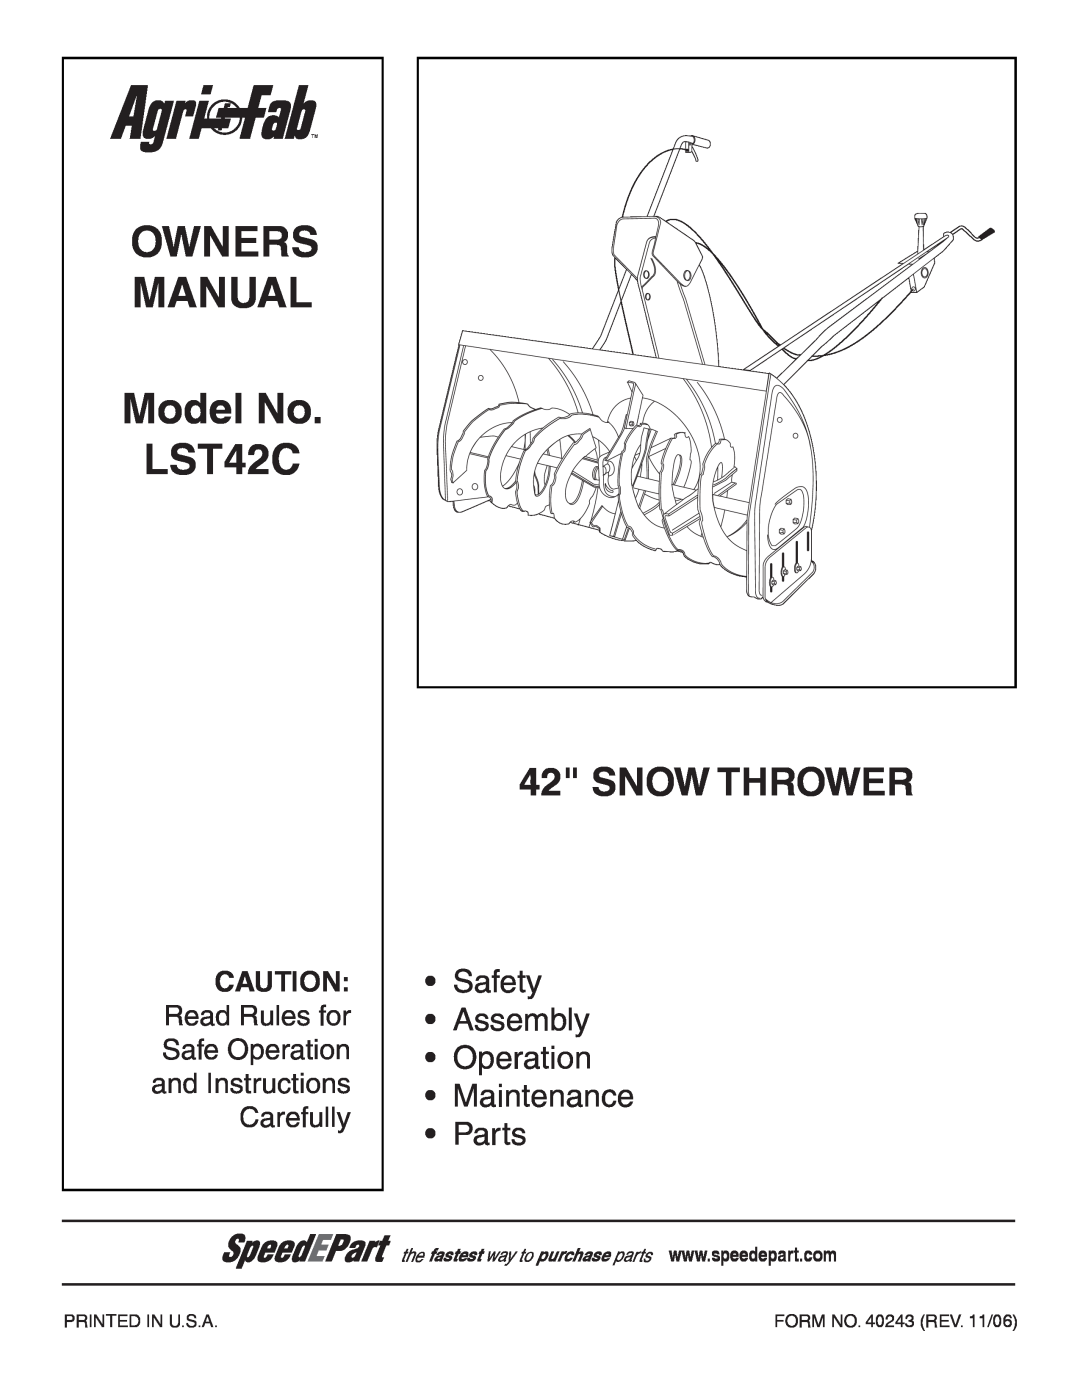 Husqvarna LST42C manual Snow Thrower, Safety Assembly Operation Maintenance Parts 